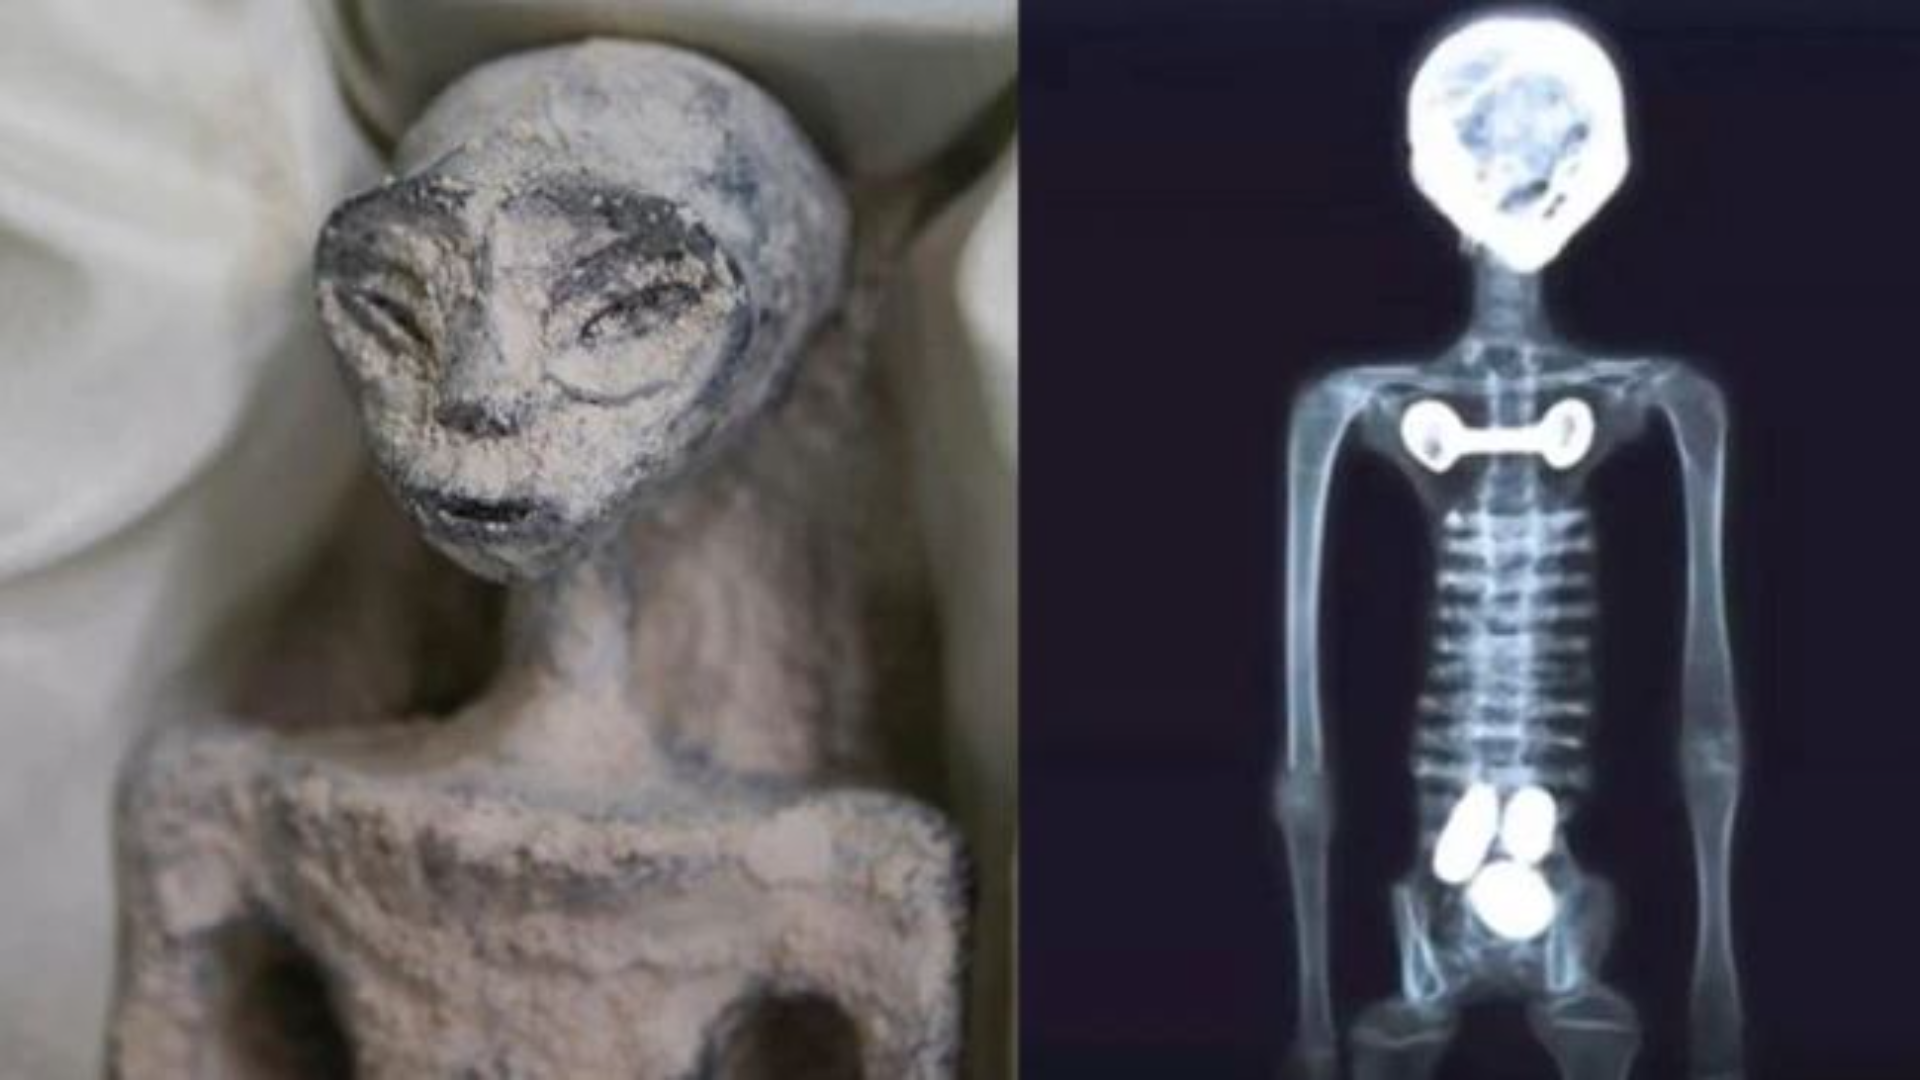 Groundbreaking research: Mexican doctors complete examination of alleged Alien Corpses